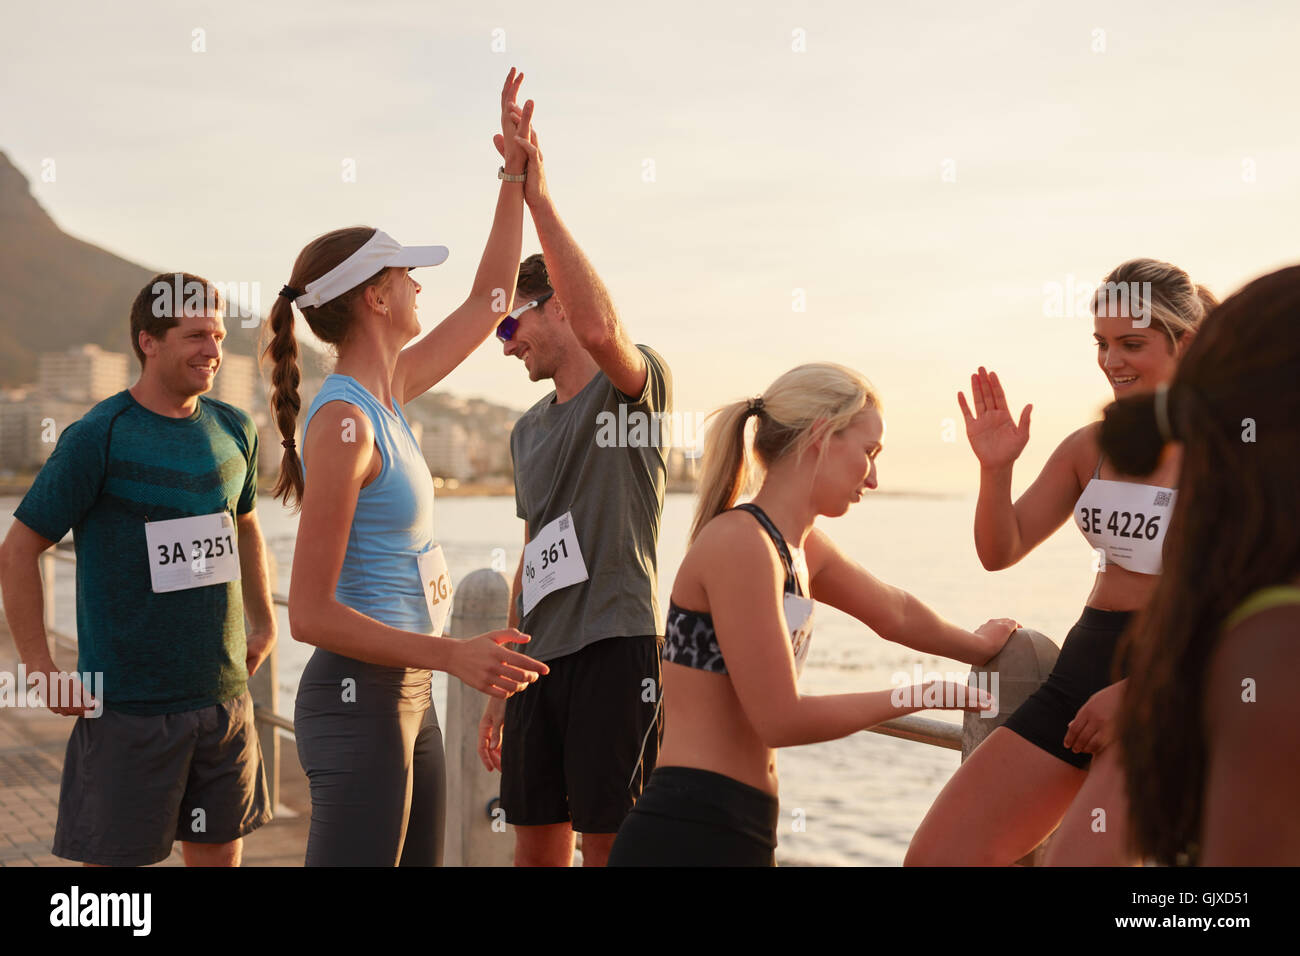 Runners giving high five to each other after a training session. Group of athletes celebrating success after a race. Stock Photo